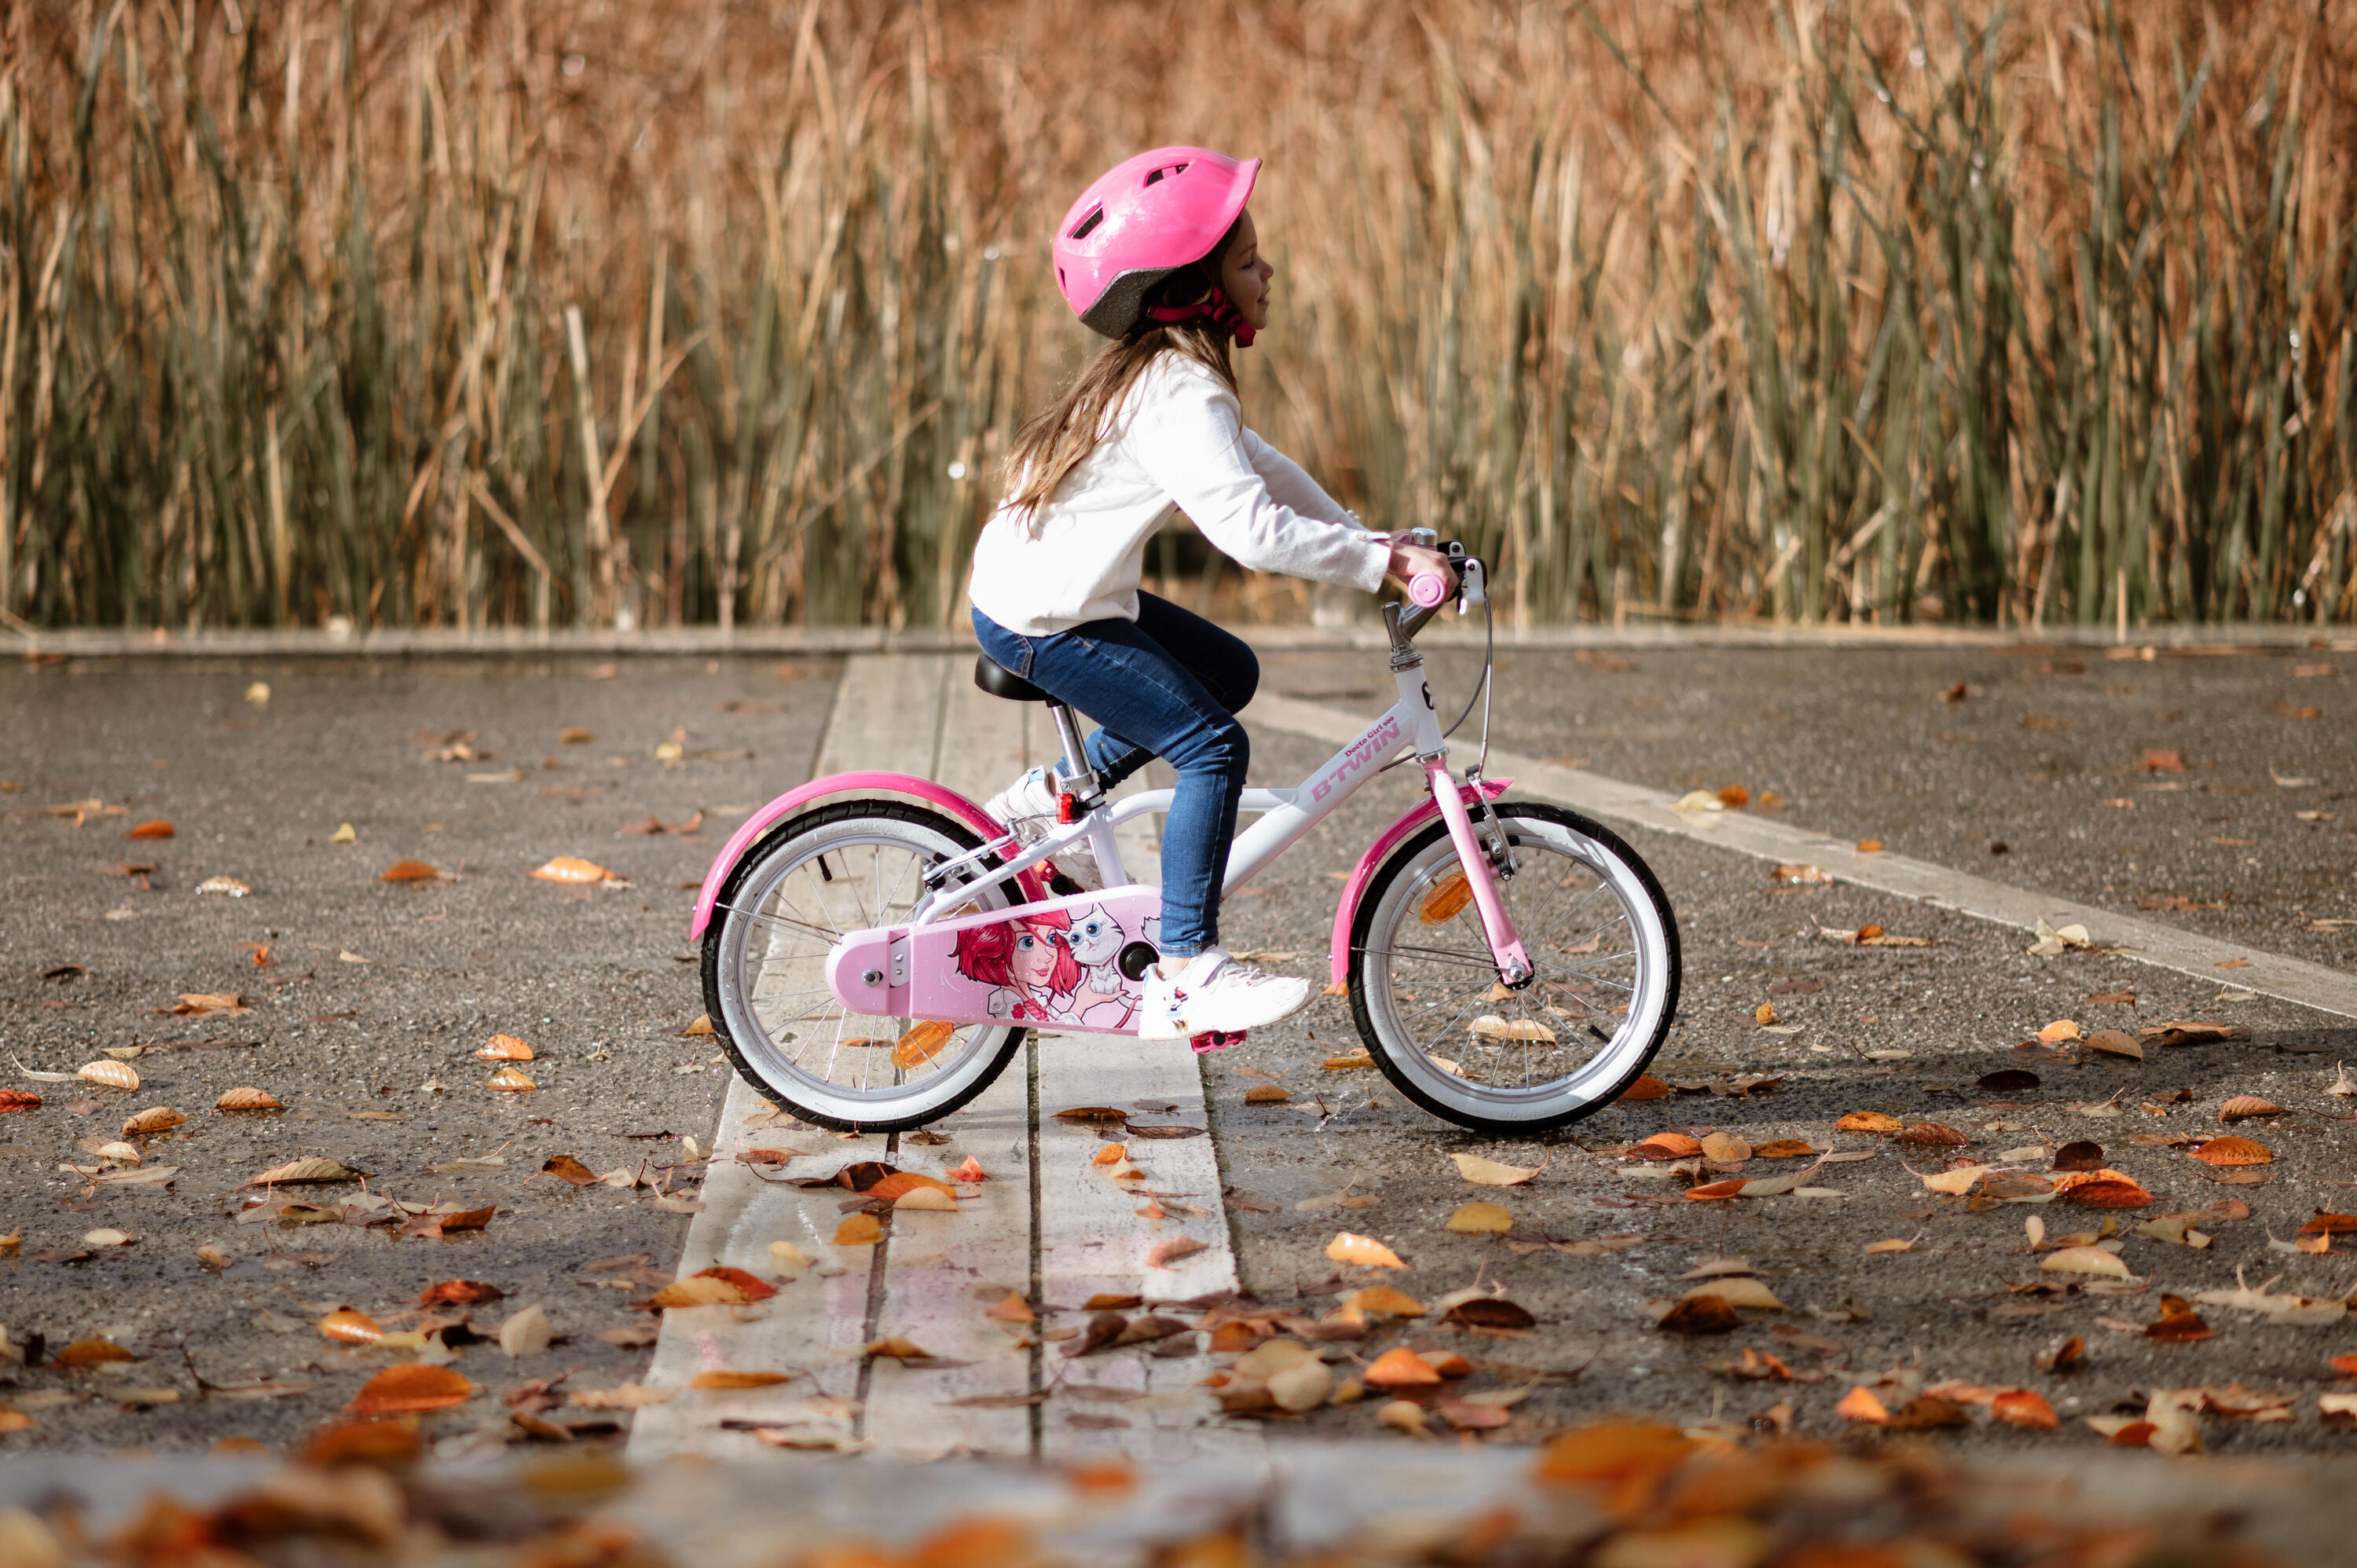 16 Inch KIDS BIKE Doctogirl 500 4-6 YEARS OLD - Pink 3/9